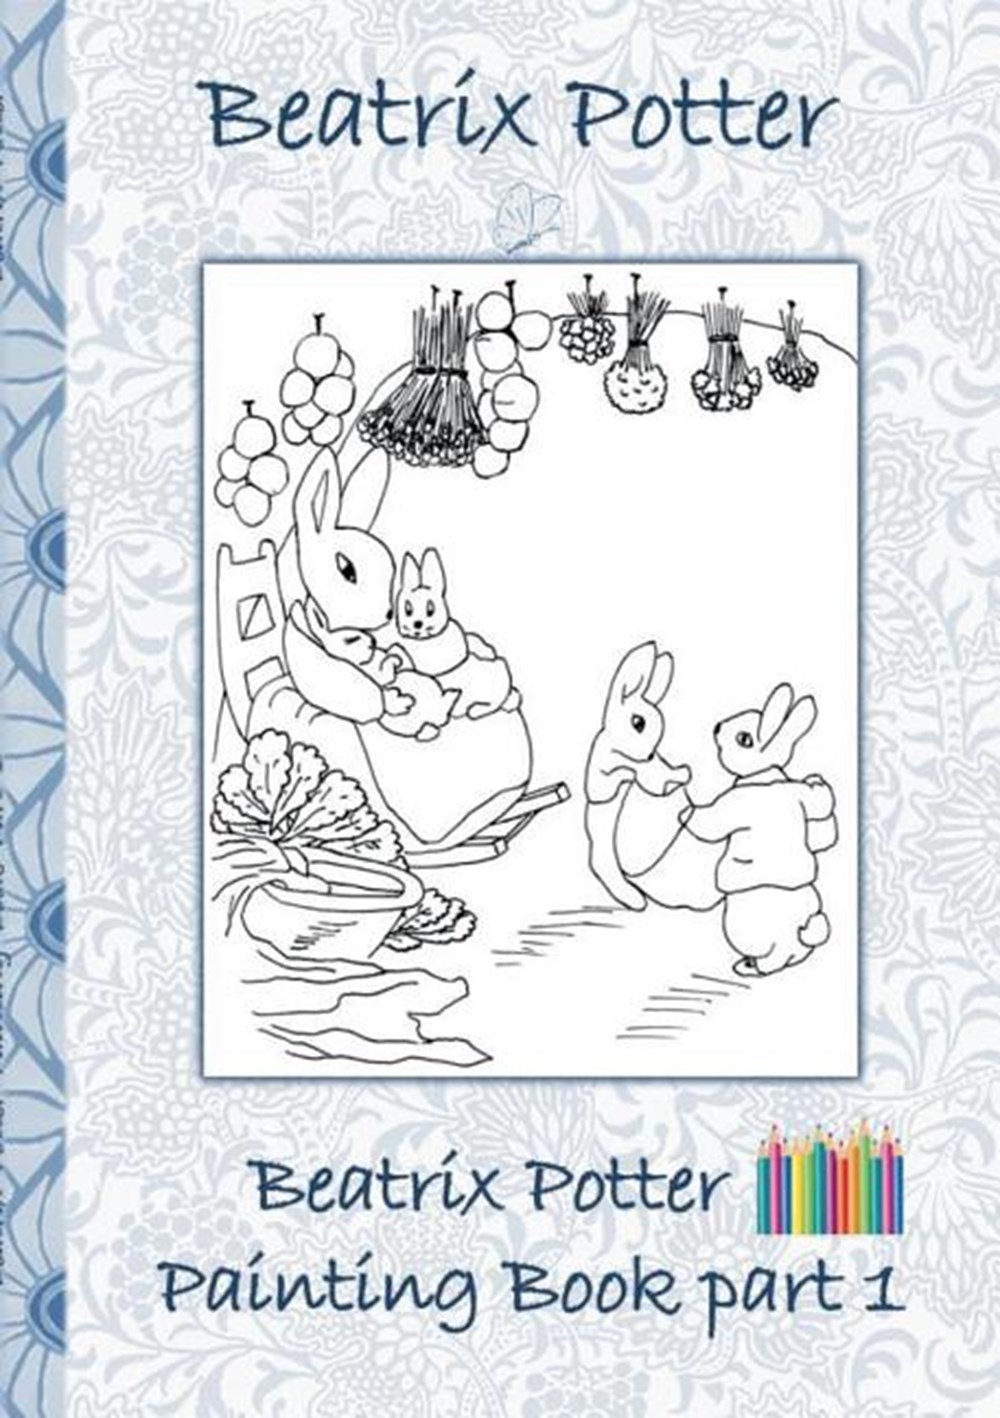 Beatrix Potter Painting Book Part 1: Colouring Book, coloring, crayons, coloured pencils colored, Ch